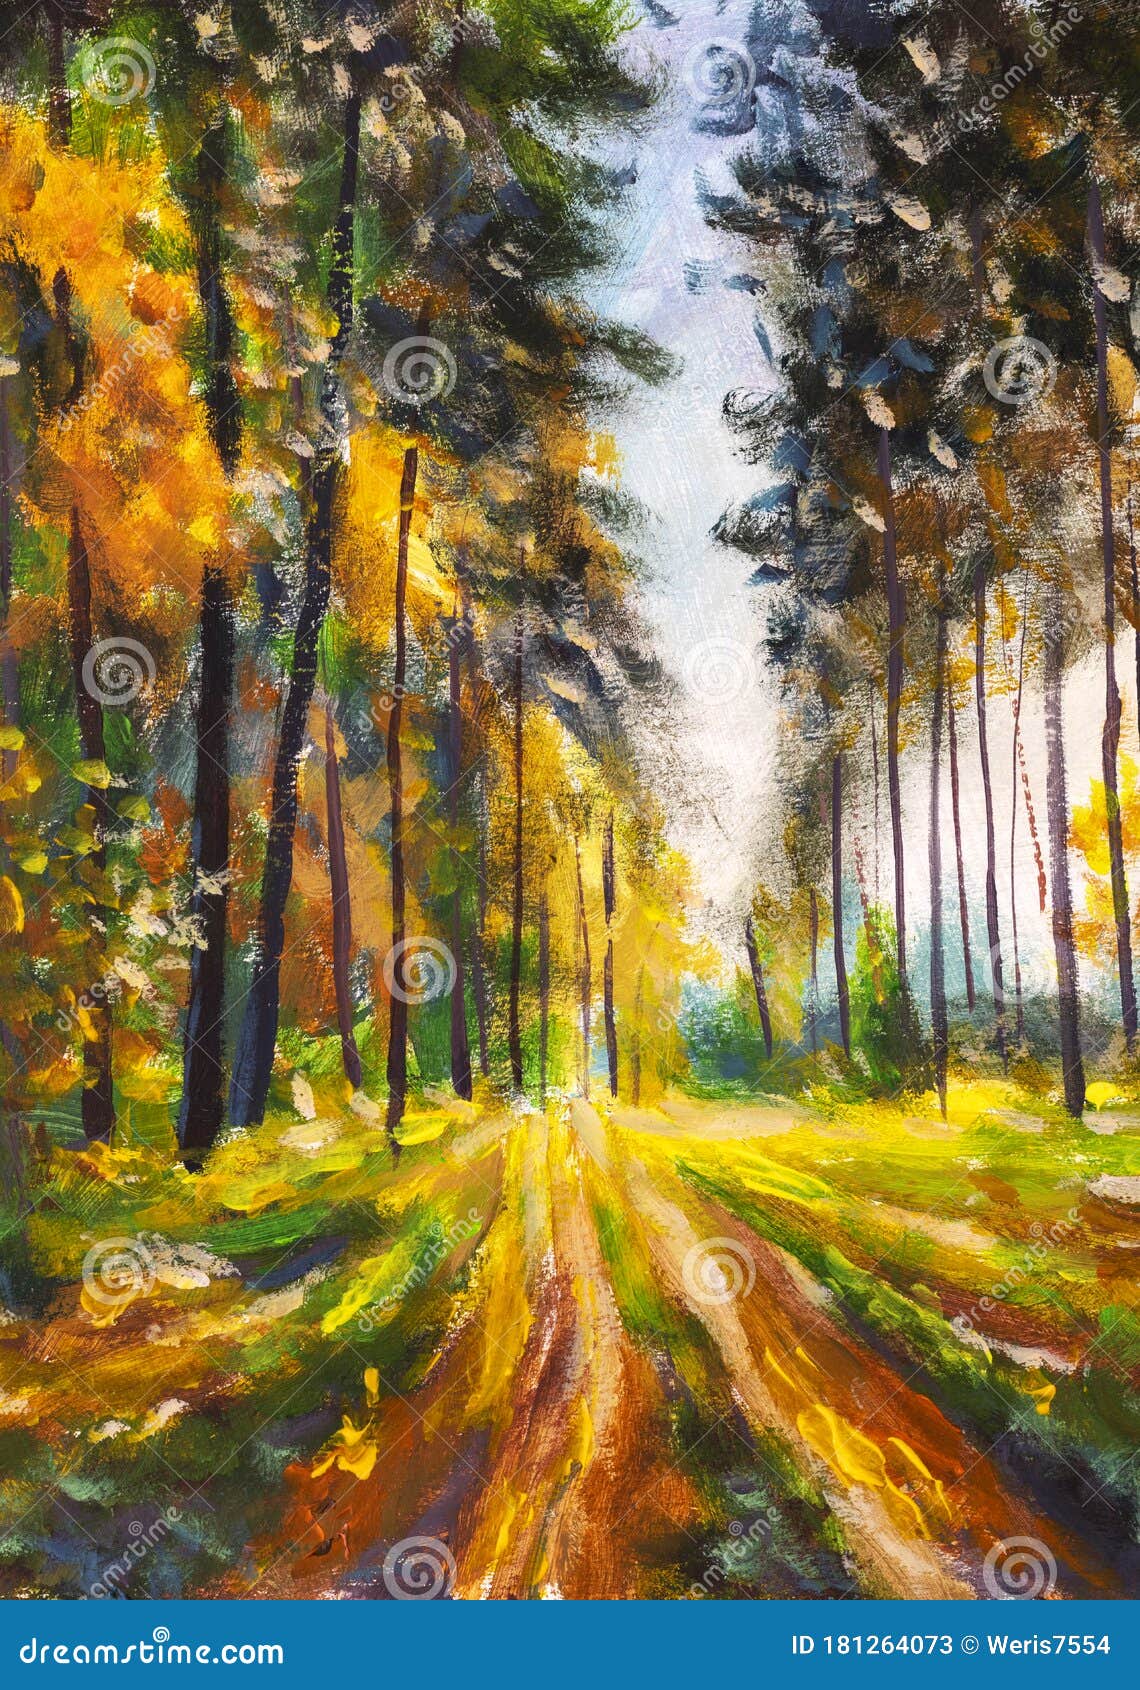 Sunset Forest Landscape Painting Park Trees Sun Rays Stock Image